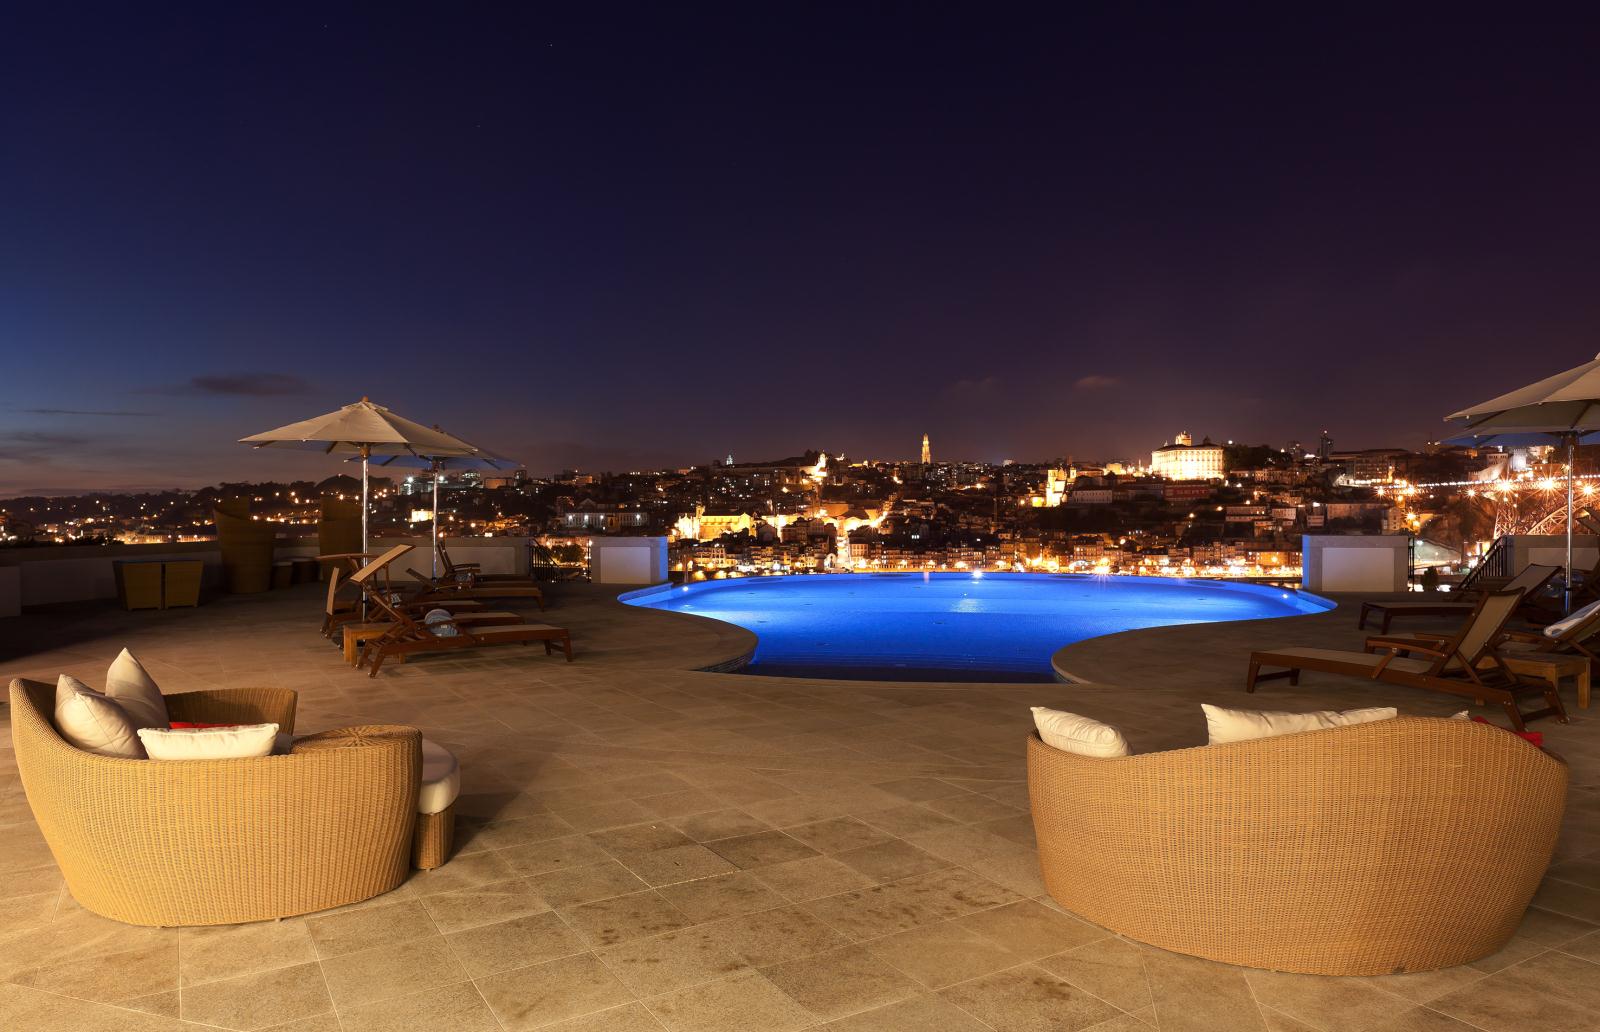 Outdoor pool at night - The Yeatman